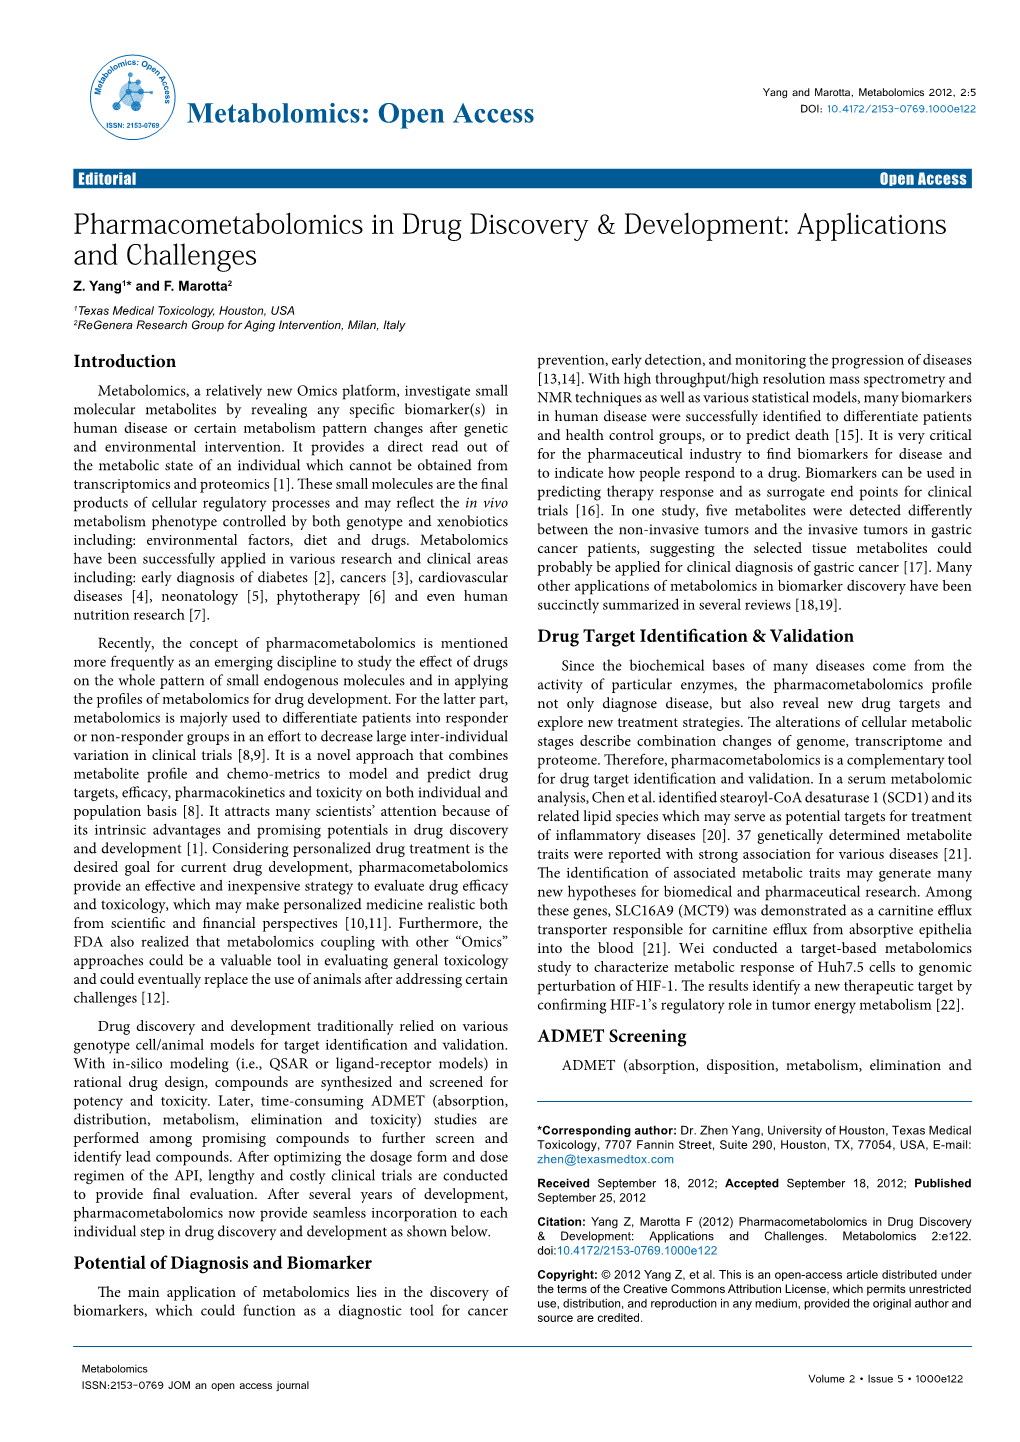 Pharmacometabolomics in Drug Discovery & Development: Applications and Challenges Z